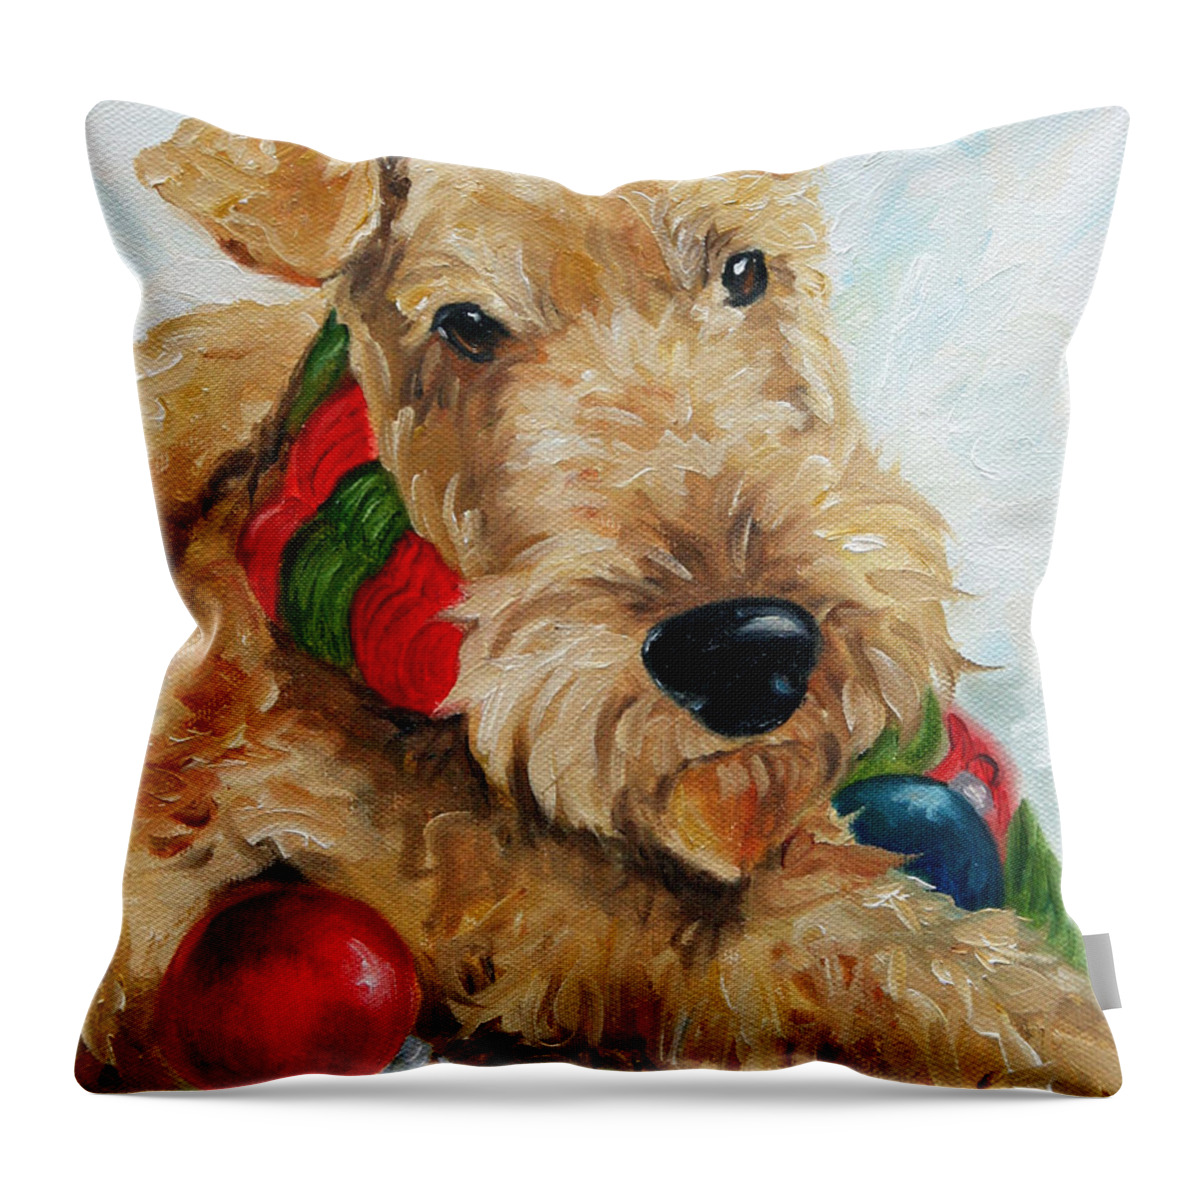 Art Throw Pillow featuring the painting Ornaments by Mary Sparrow